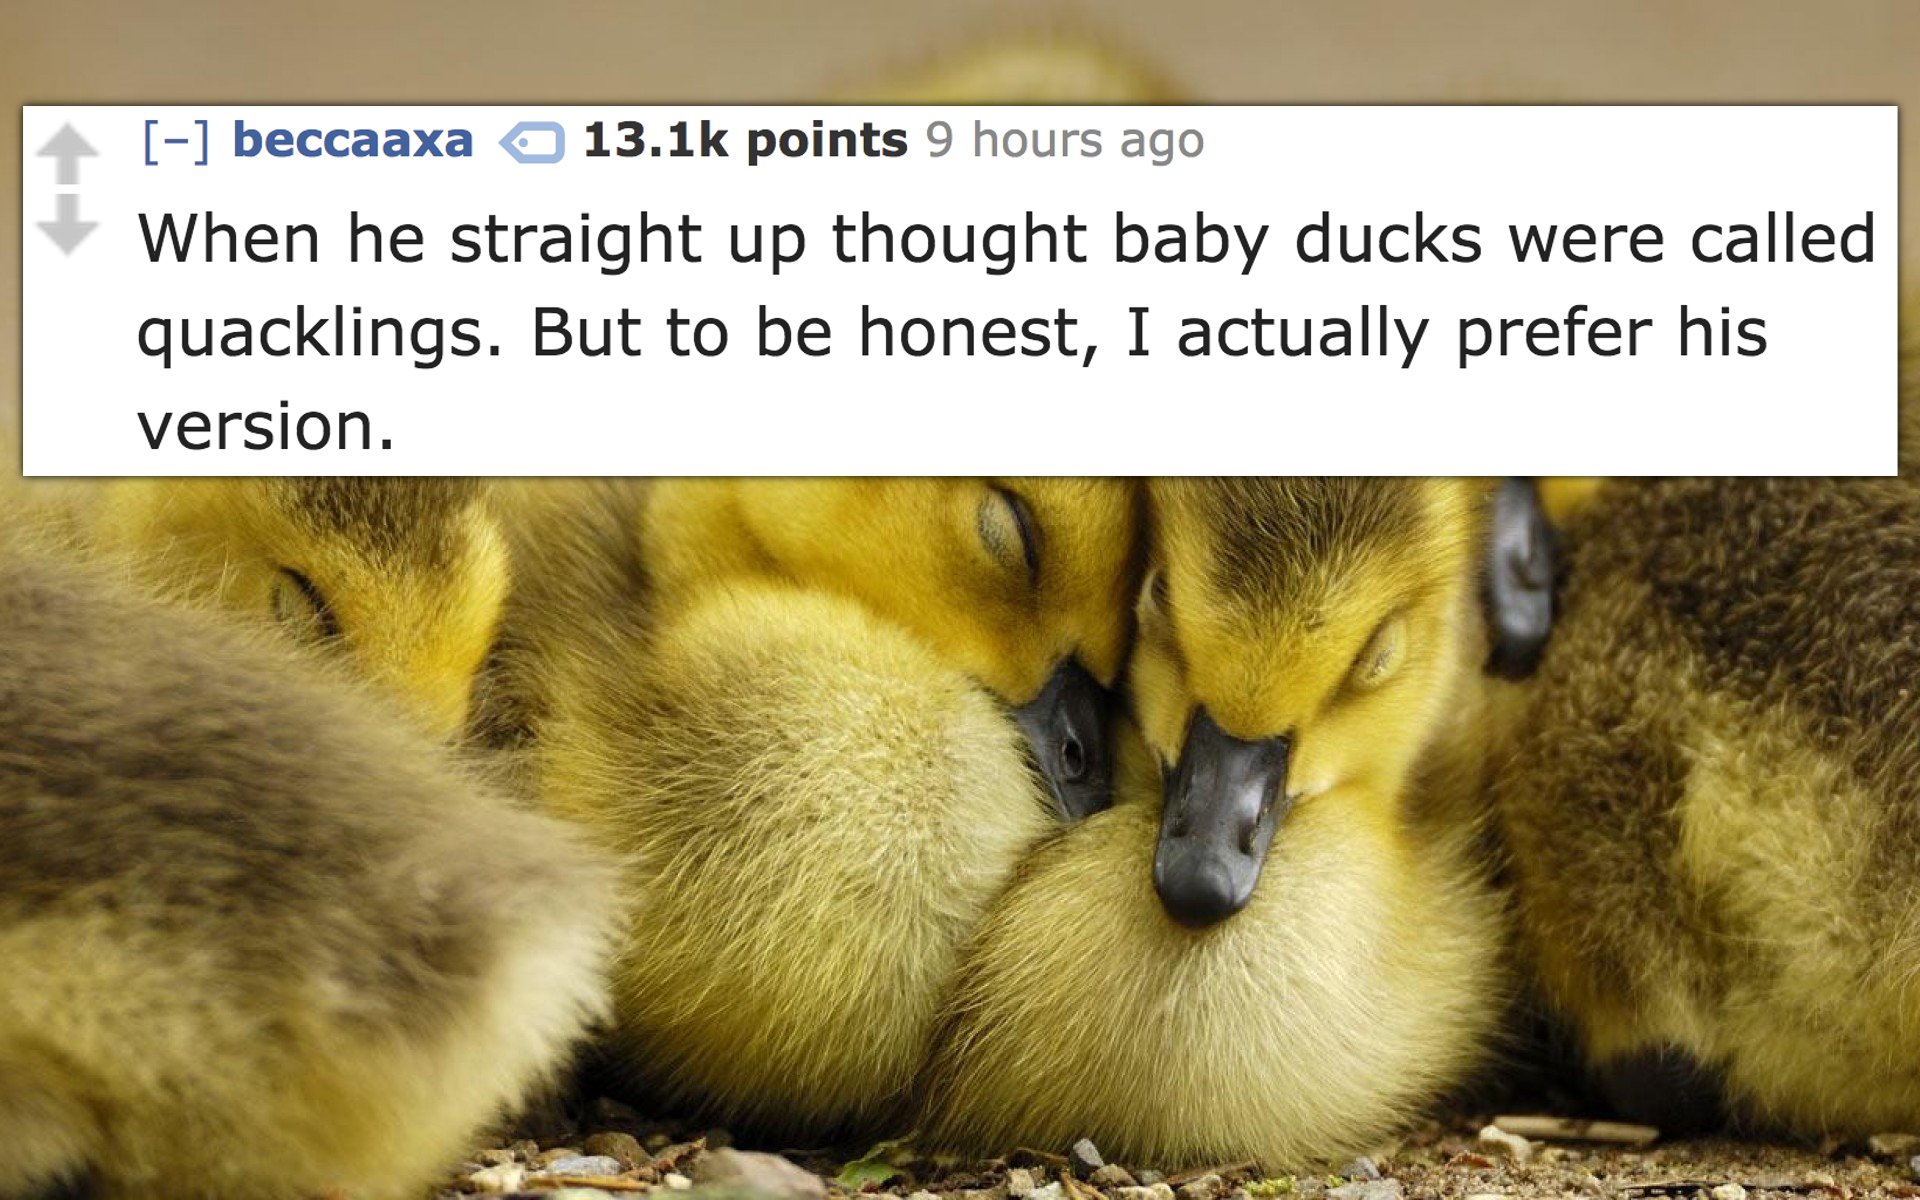 cute ducks - beccaaxa points 9 hours ago When he straight up thought baby ducks were called quacklings. But to be honest, I actually prefer his version.